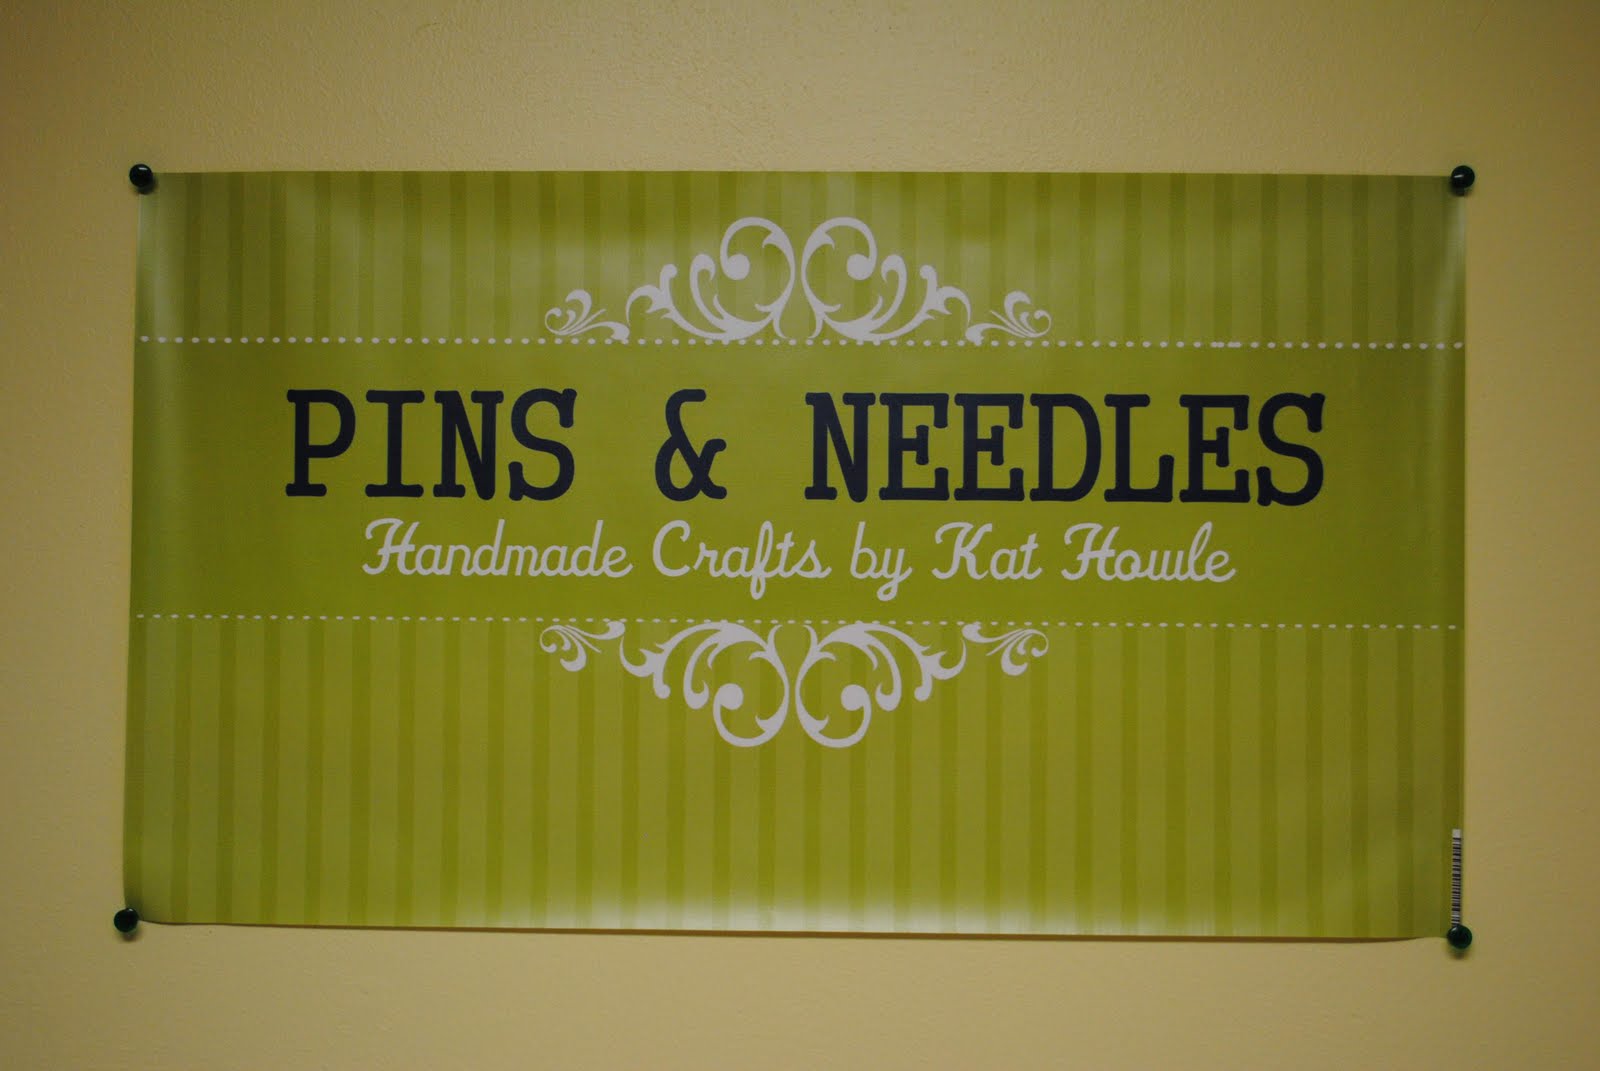 Pins & Needles: Back in Business!